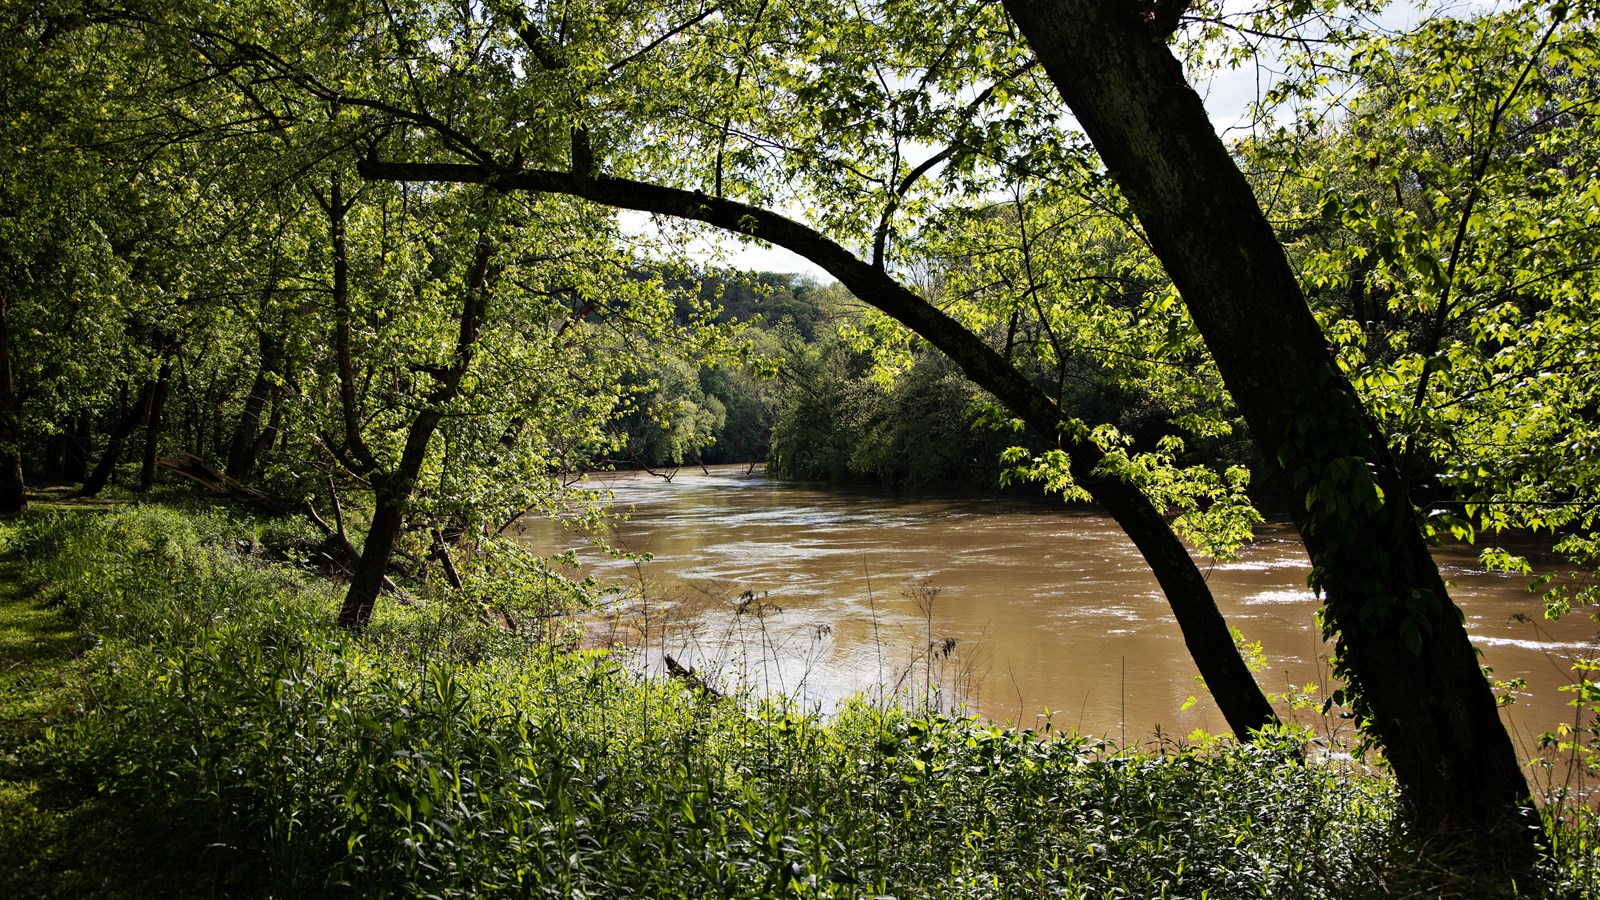 A muddy river flows through a valley with trees covering the river banks.